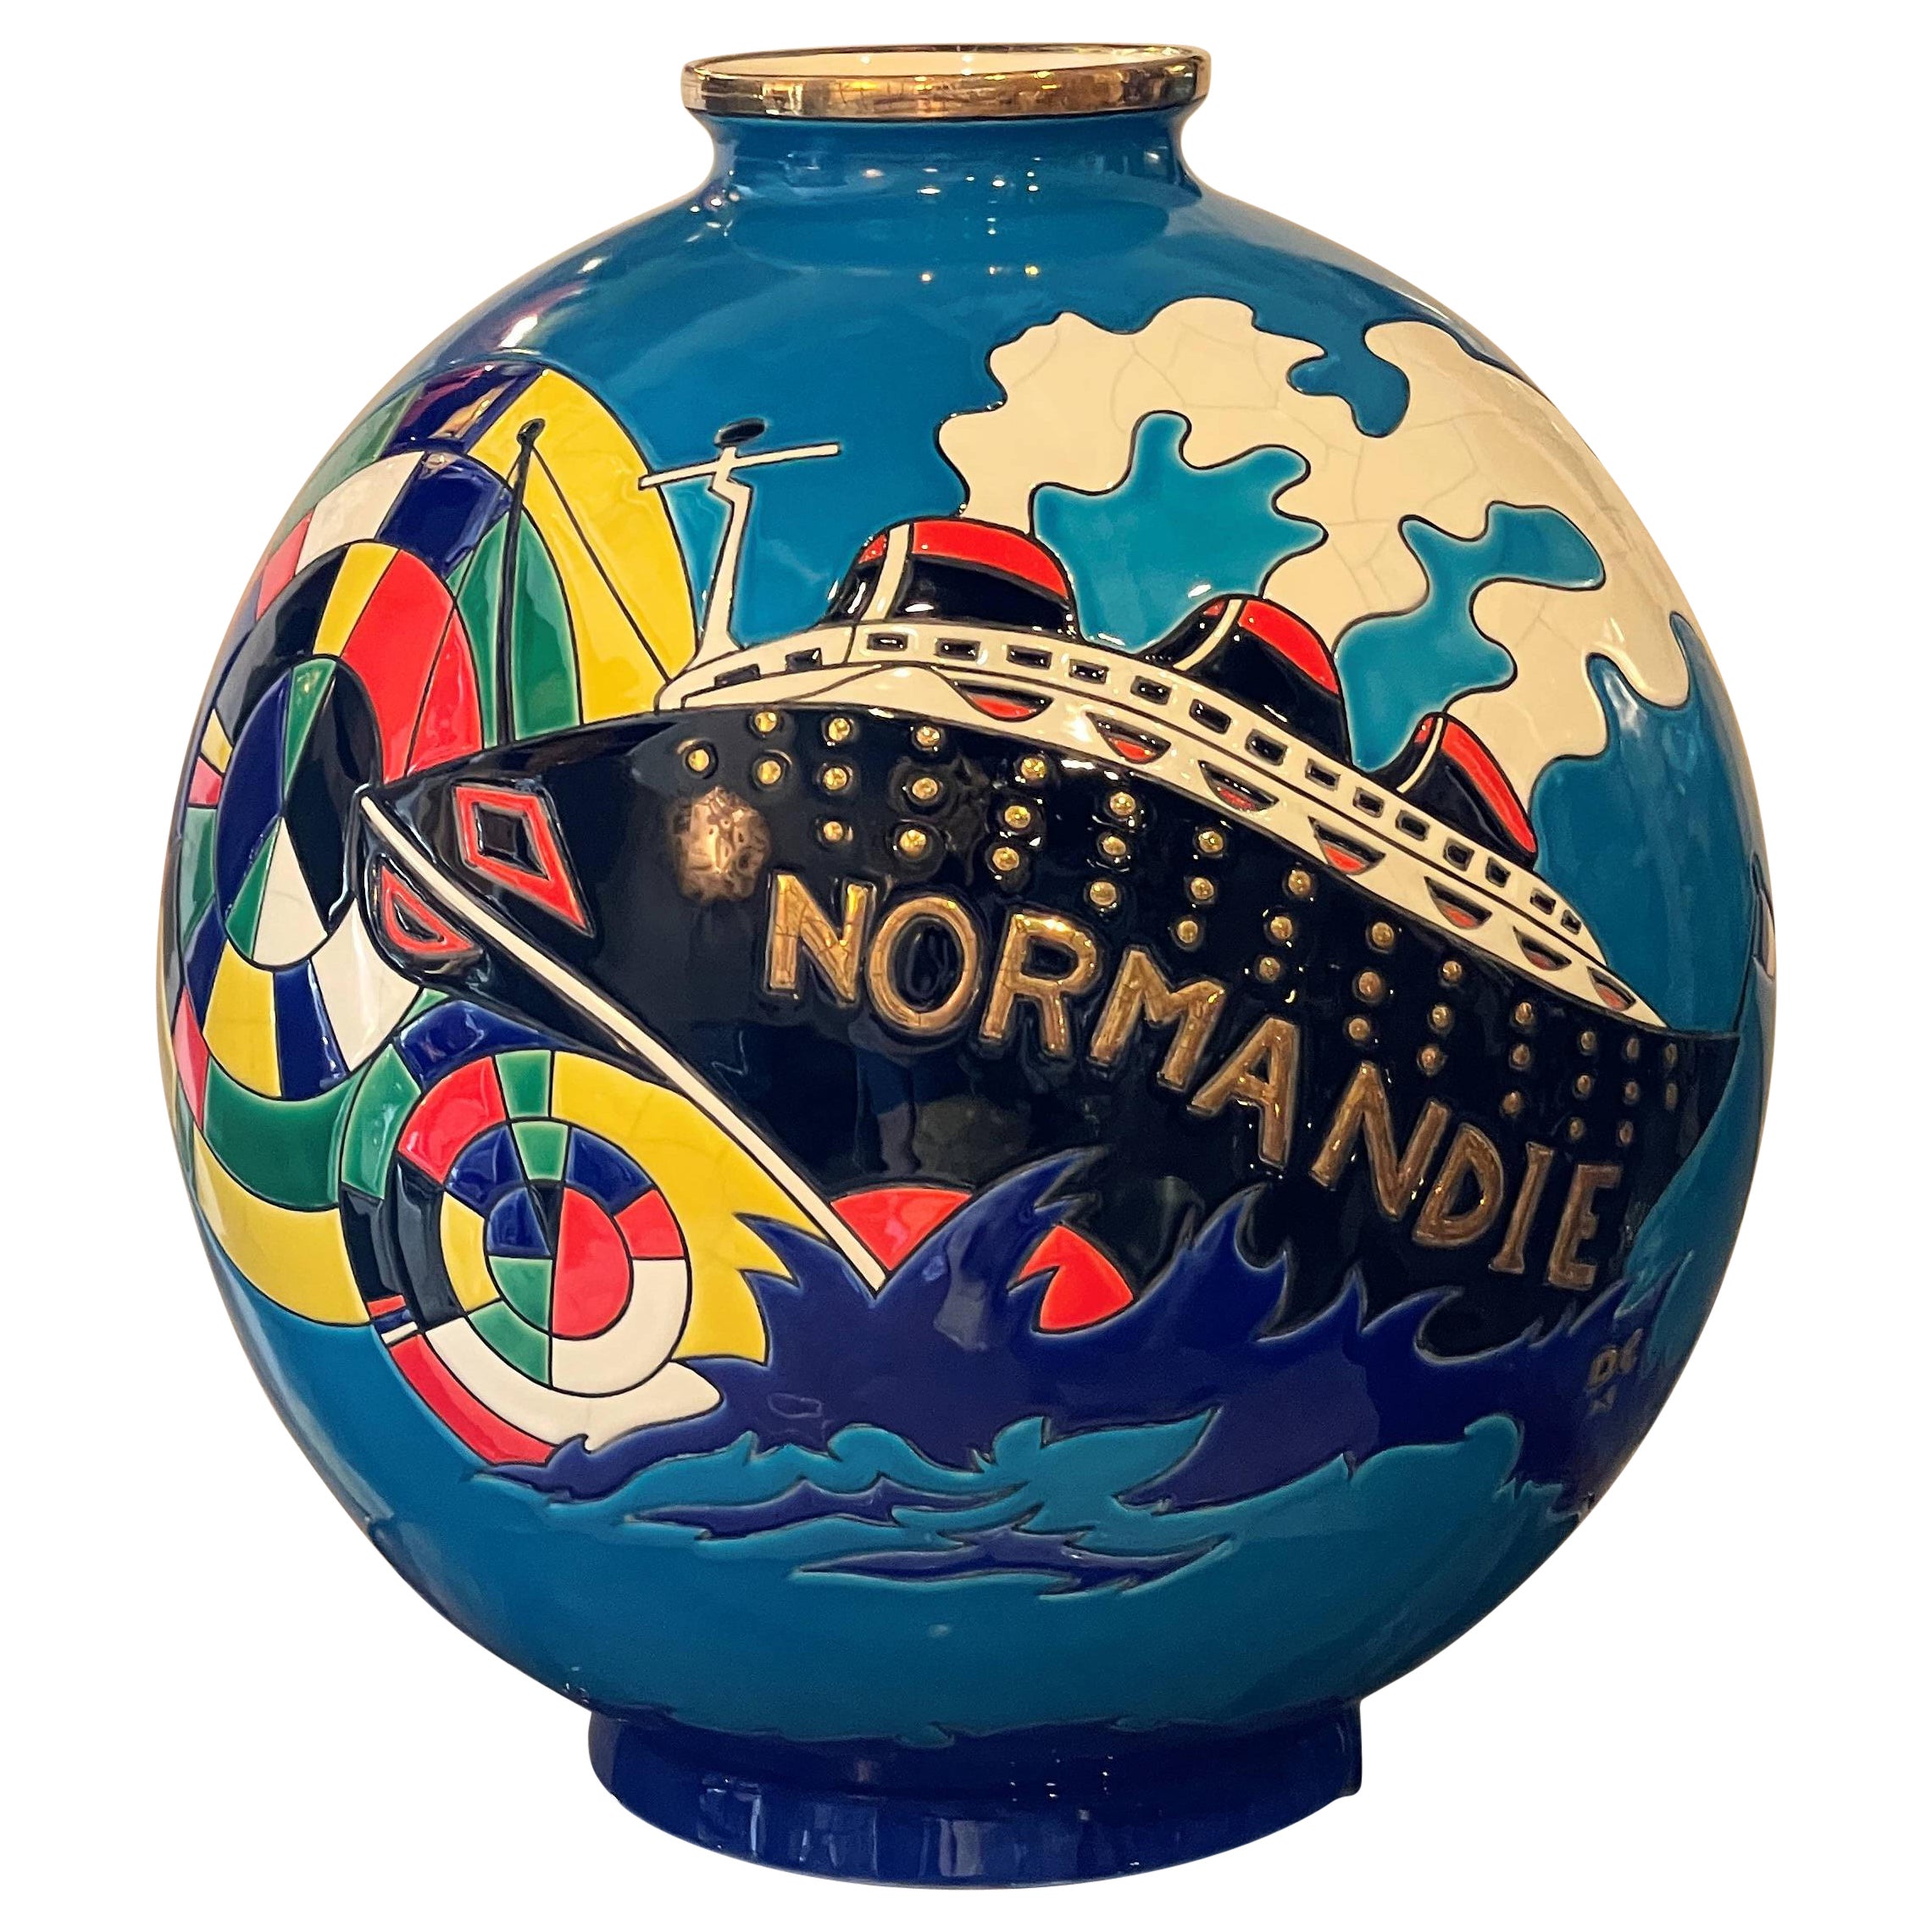 Limited Edition Vase by Longwy, Titled Normandie